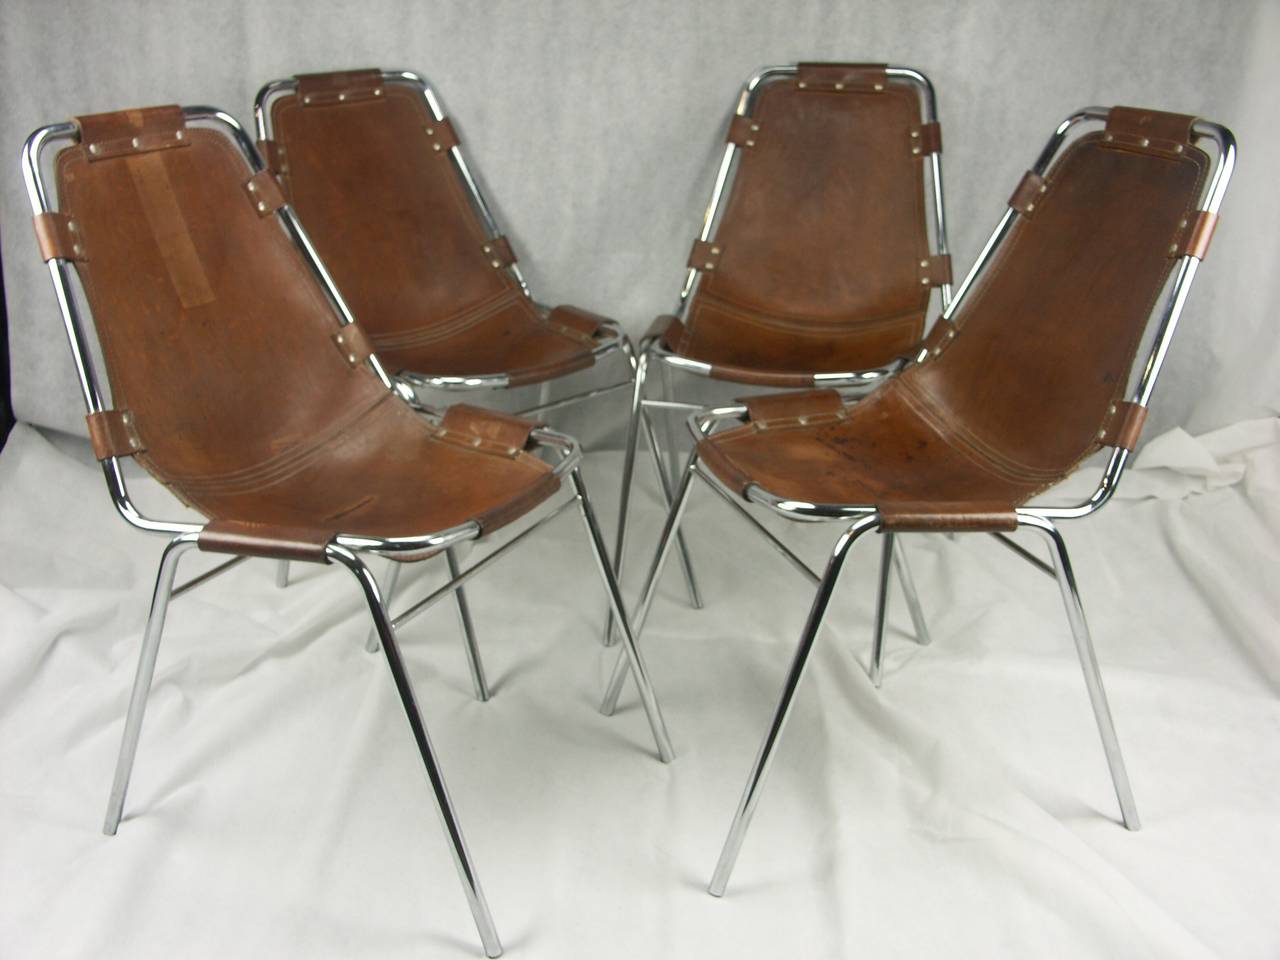 A original set of four Charlotte Perriand chairs 